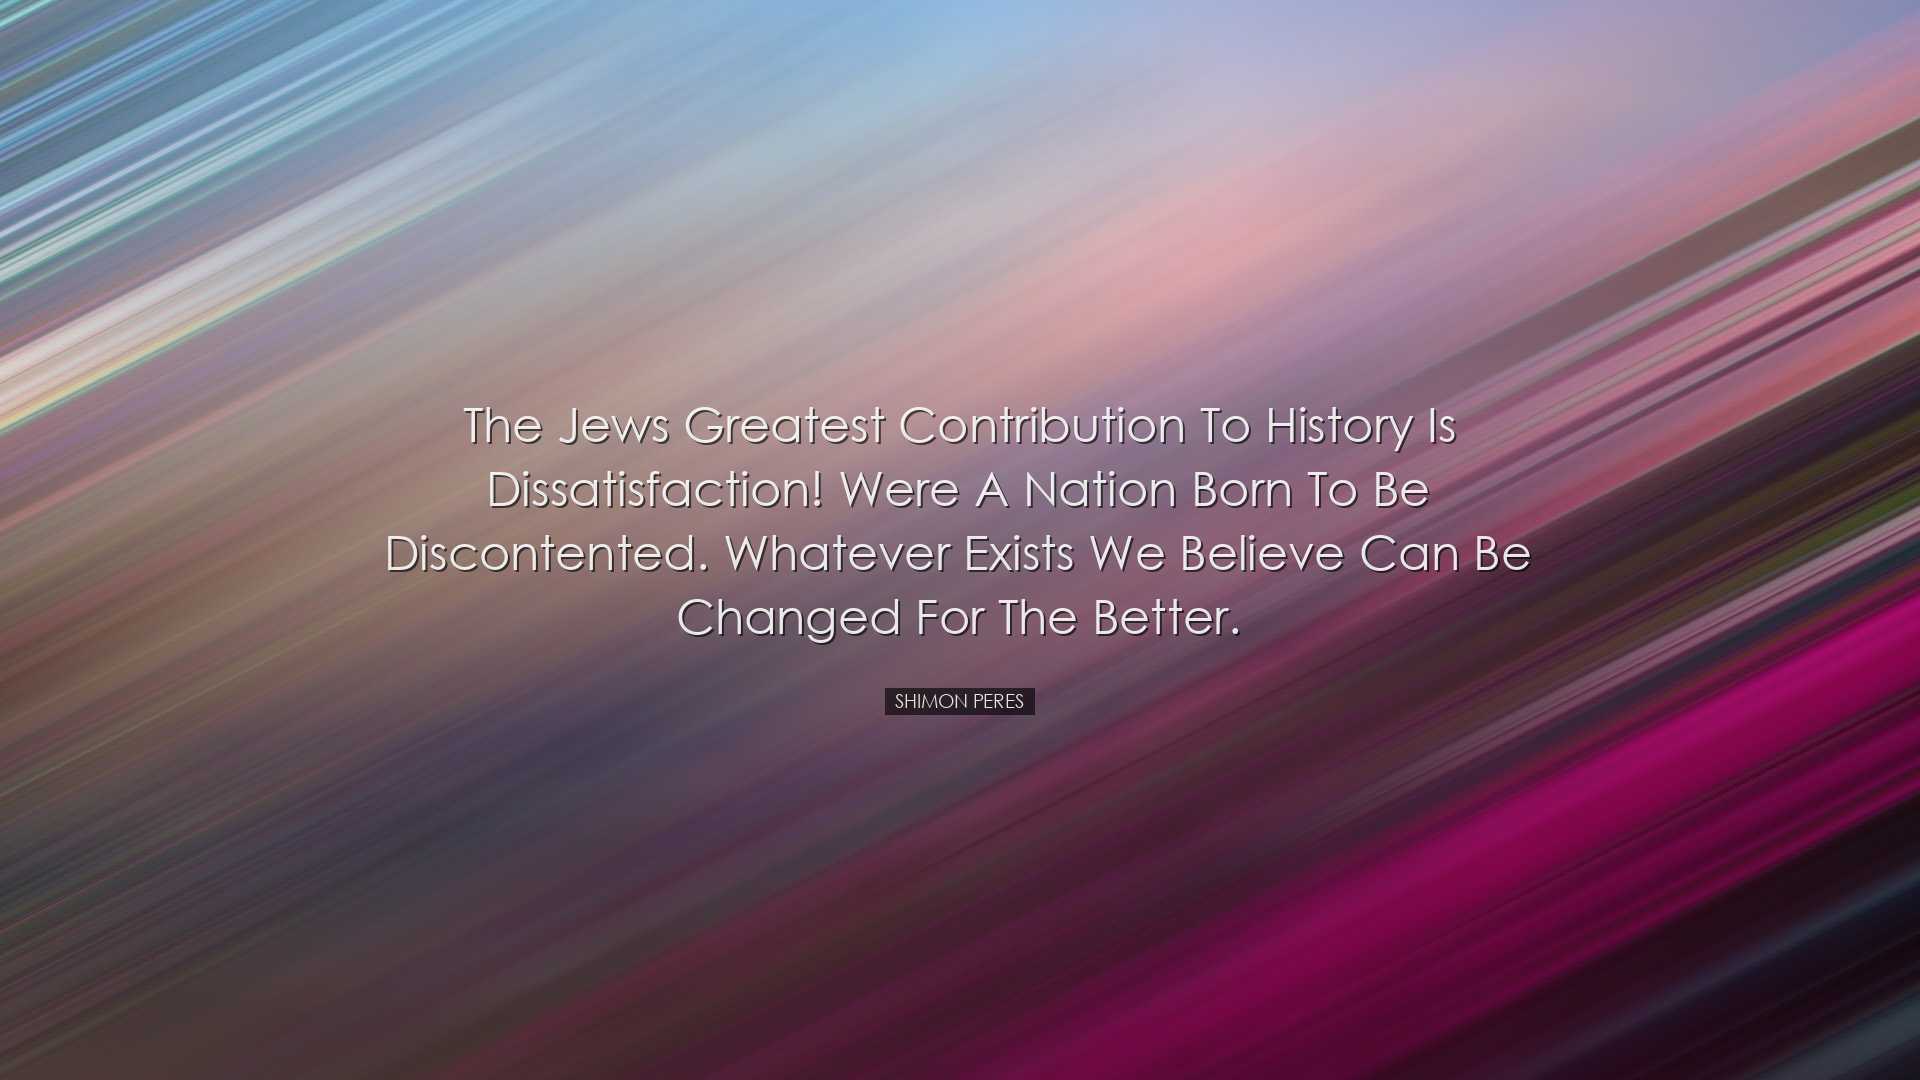 The Jews greatest contribution to history is dissatisfaction! Were